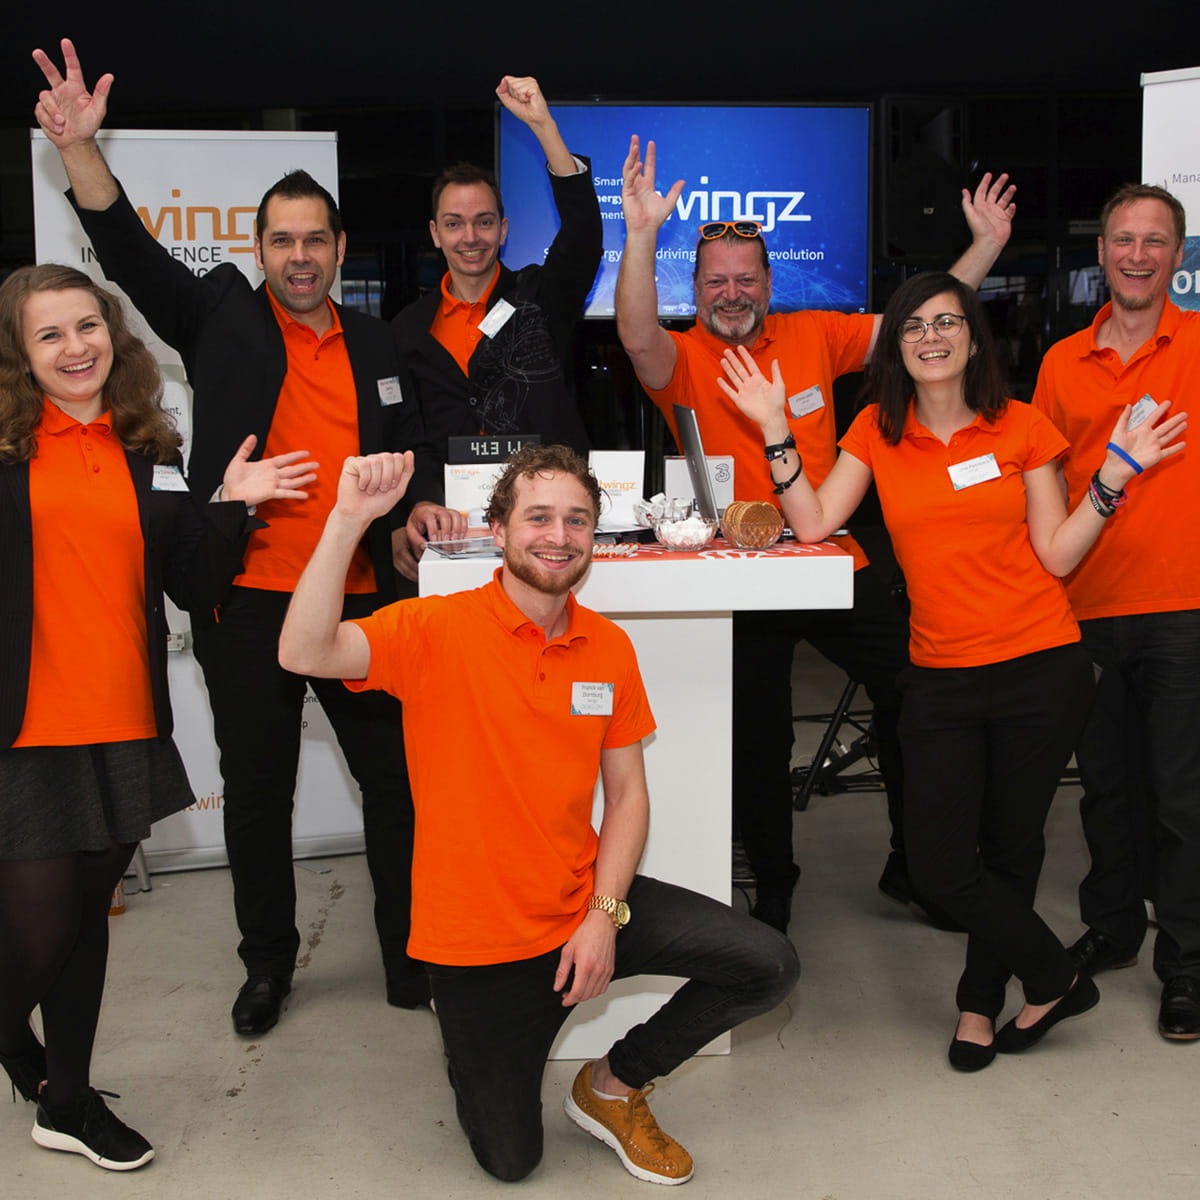 The jubilant seven-person team from twingz, a start-up with a double-edged business model: smart energy management for consumers and loss prevention for insurers.